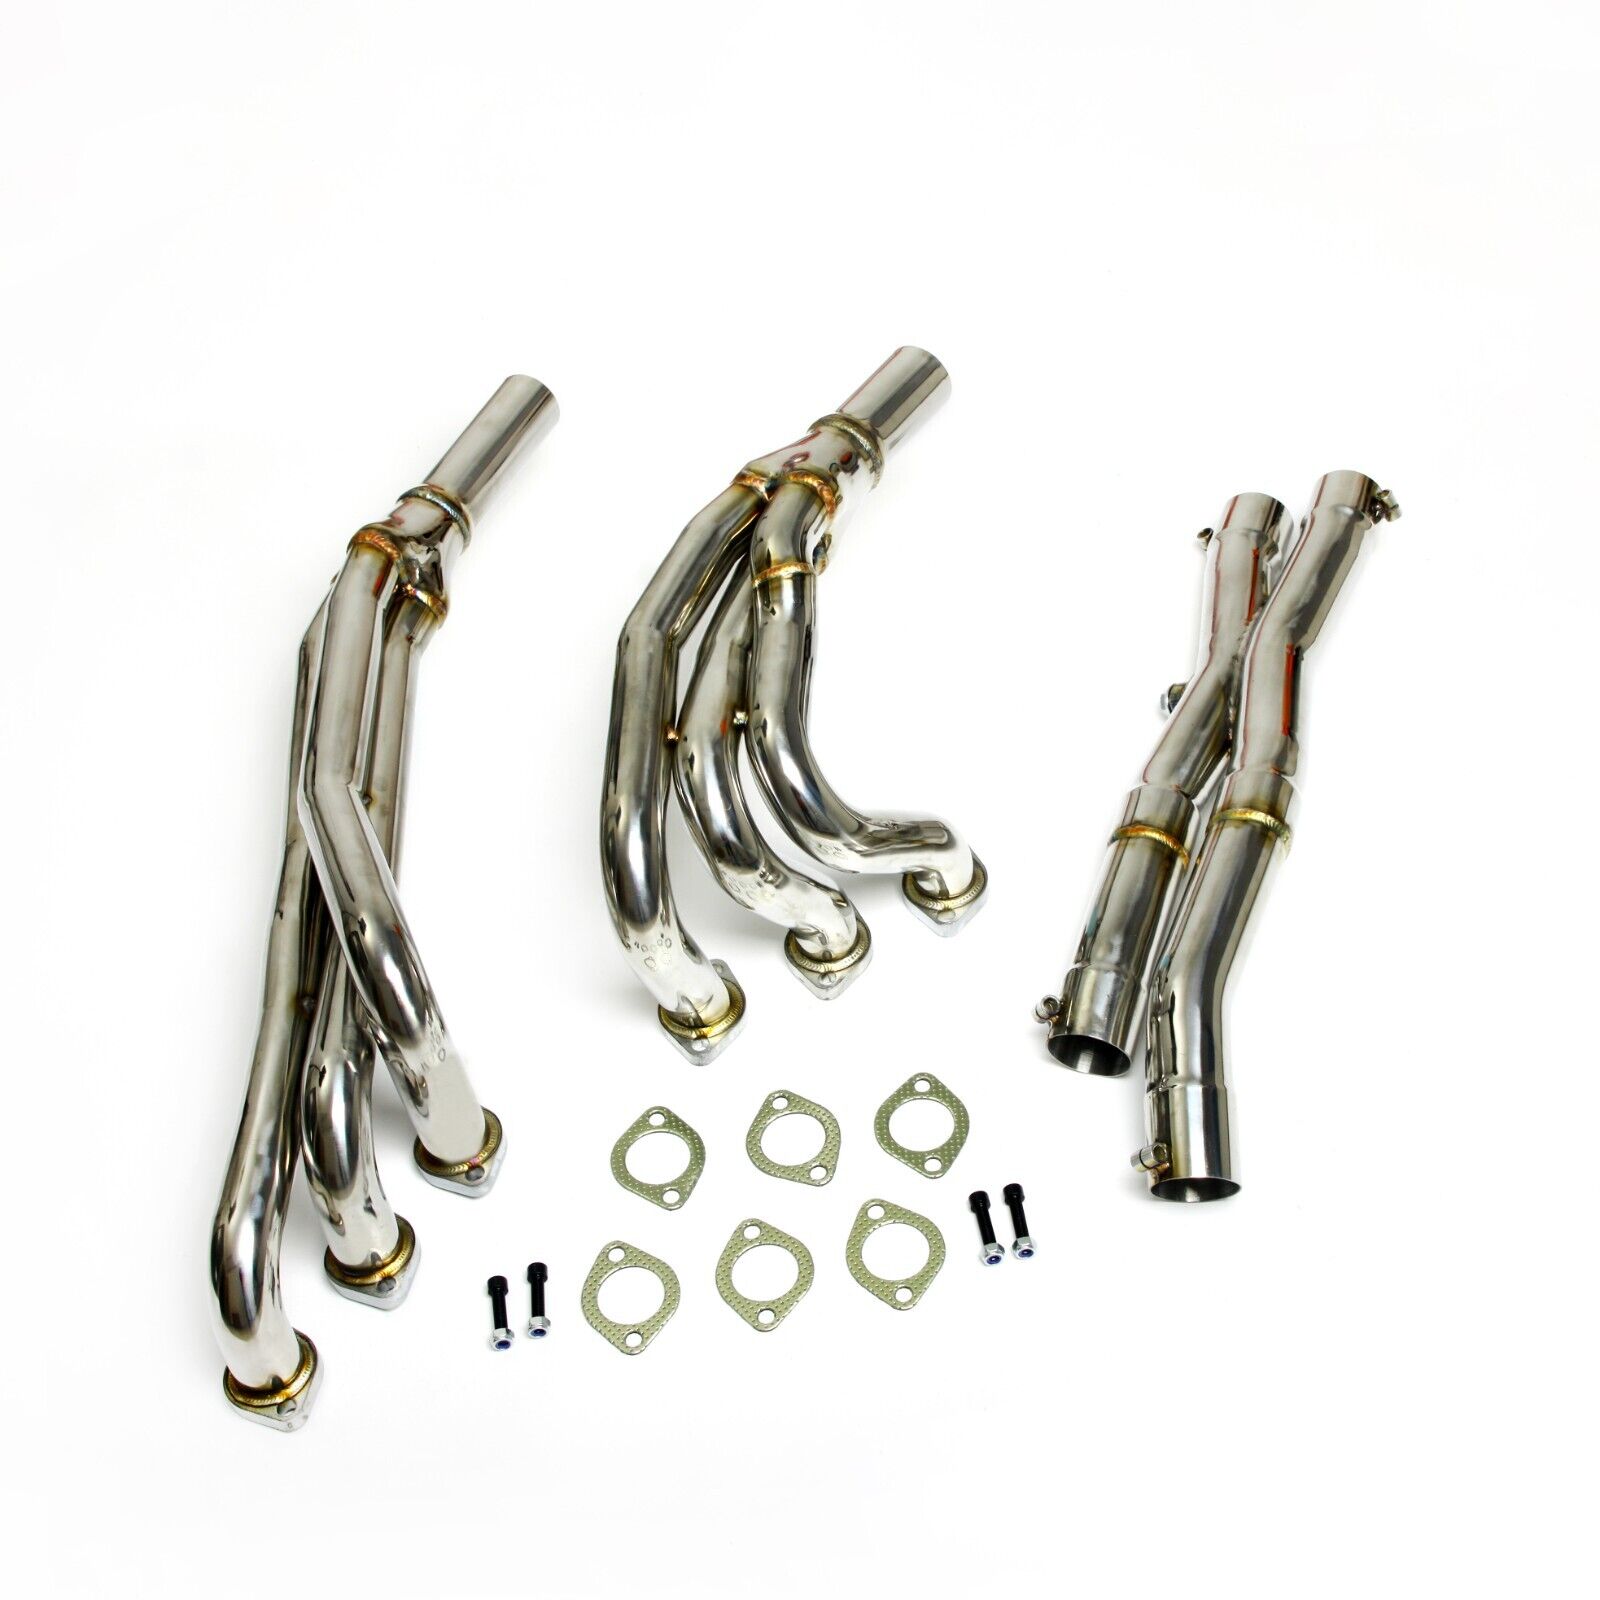 FOR BMW E30 E34 SPORT LONG EXHAUST MANIFOLDS All 6CYL M20 MODELS LEFT HAND